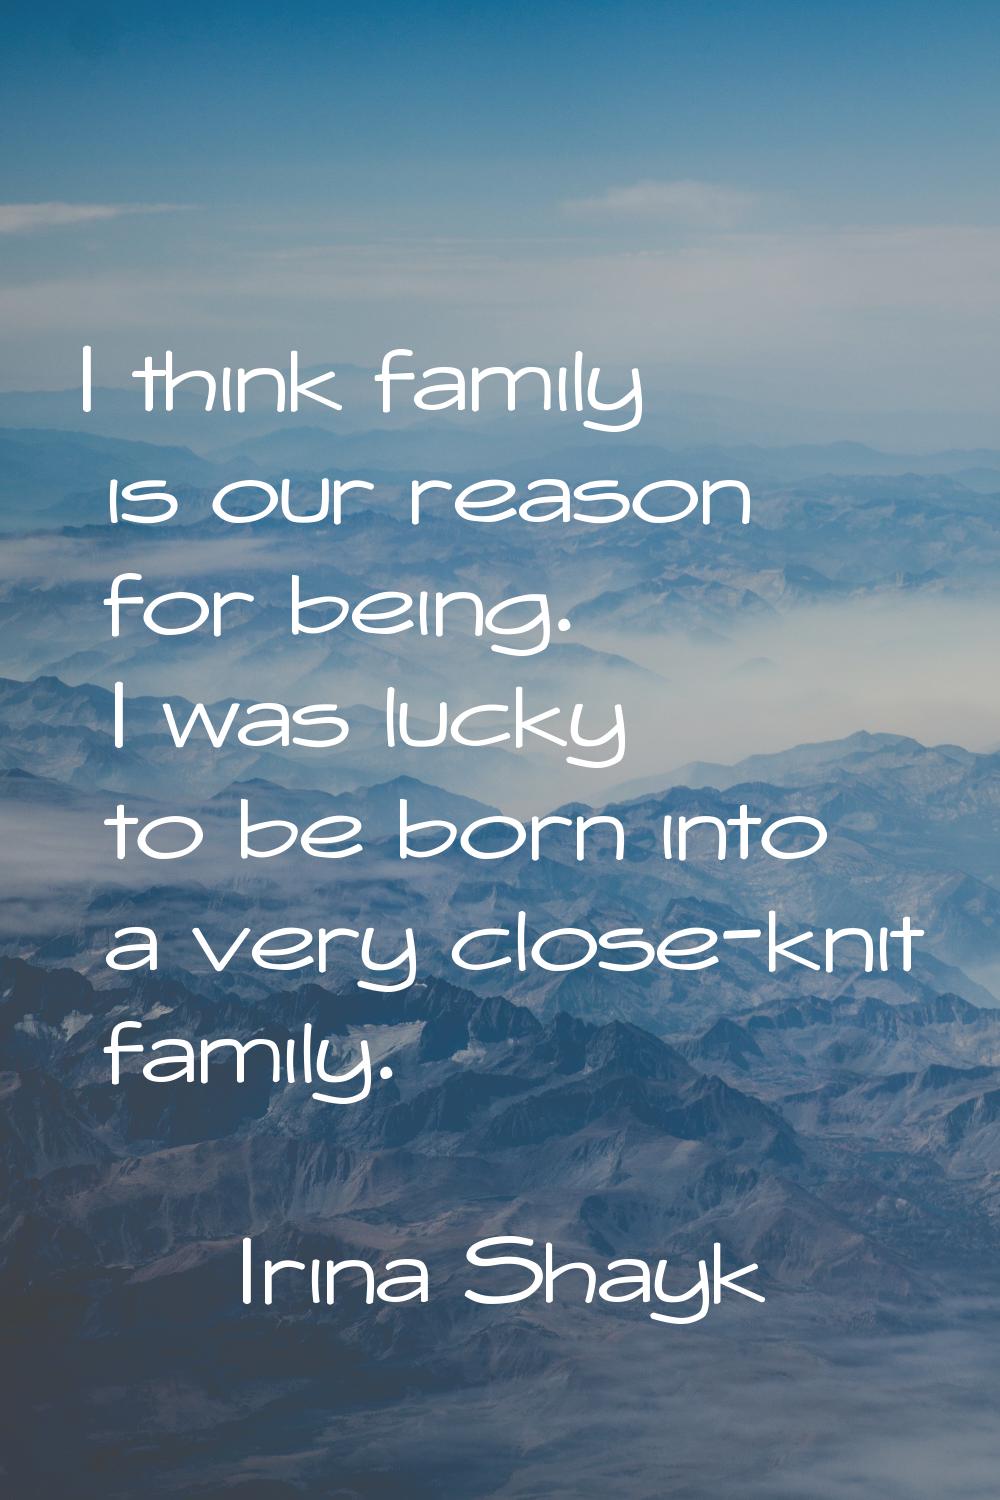 I think family is our reason for being. I was lucky to be born into a very close-knit family.